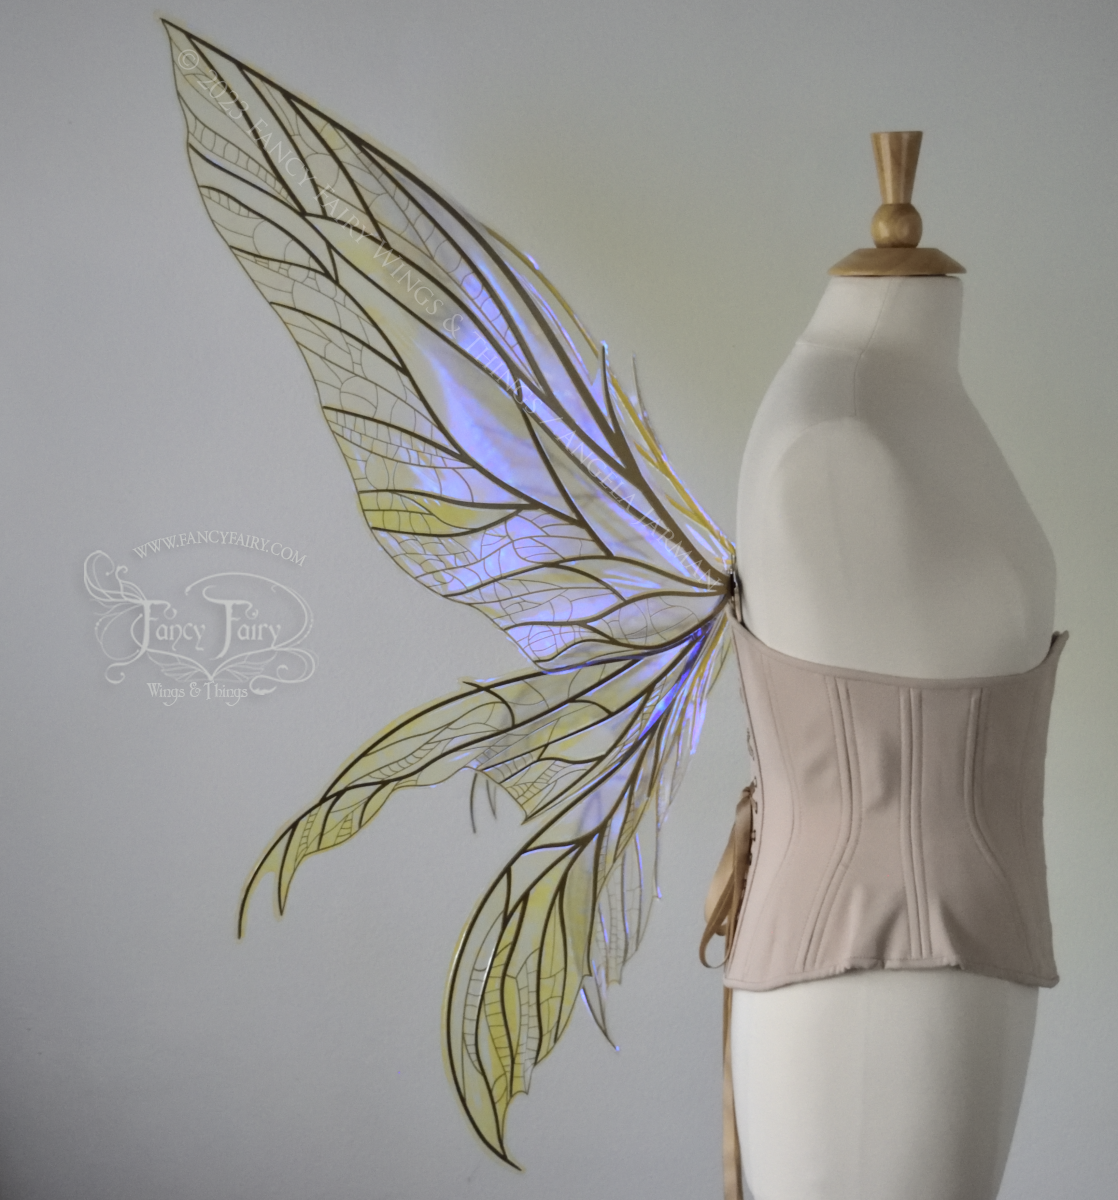 Left side view #2 of an ivory dress form wearing an alabaster underbust corset & large violet iridescent fairy wings. Upper panels are elongated with pointed tips, 2 lower panels curve downward, lots of thin vein detail in gold